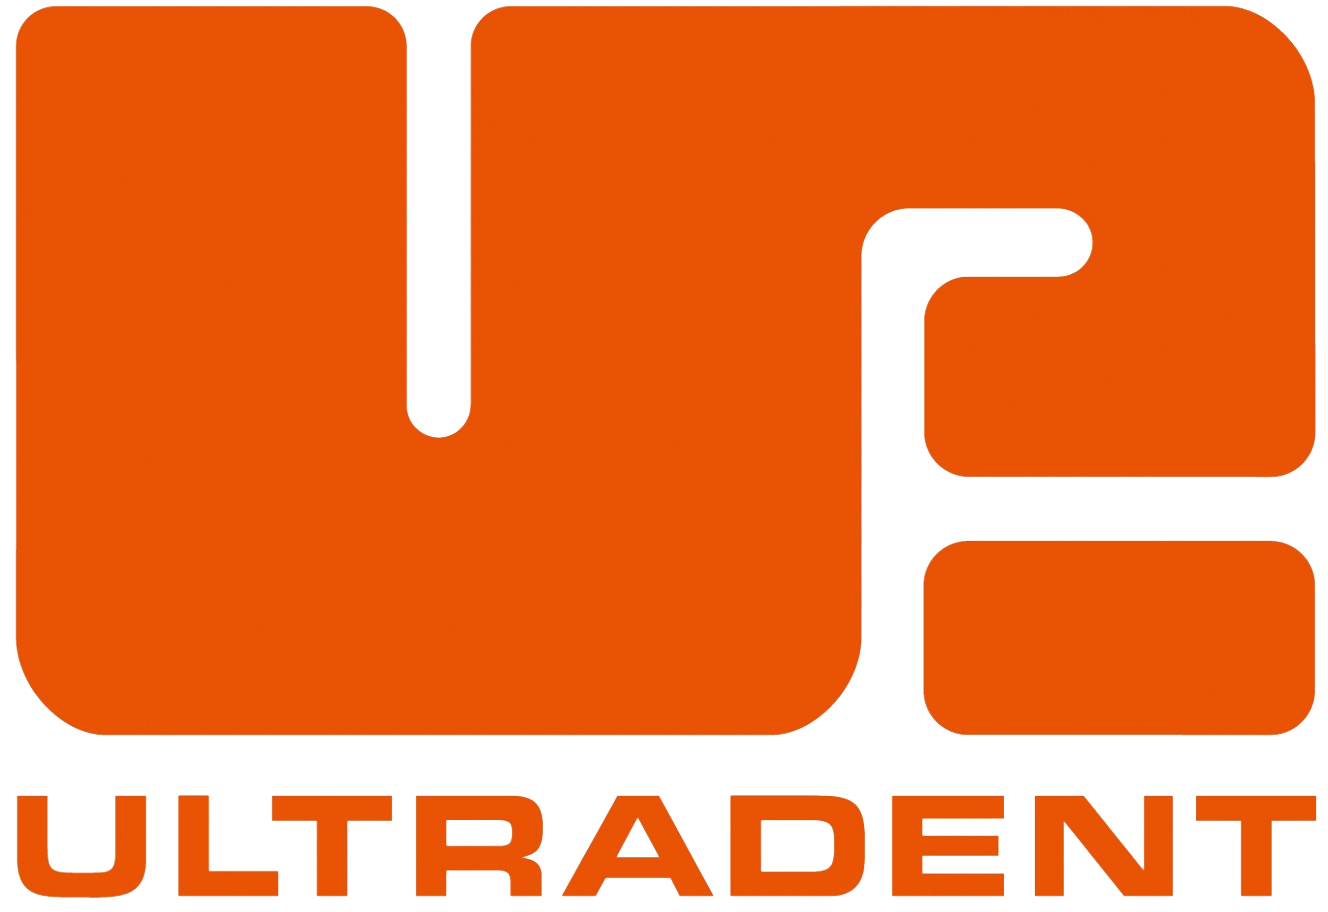 Ultradent Products, Inc.